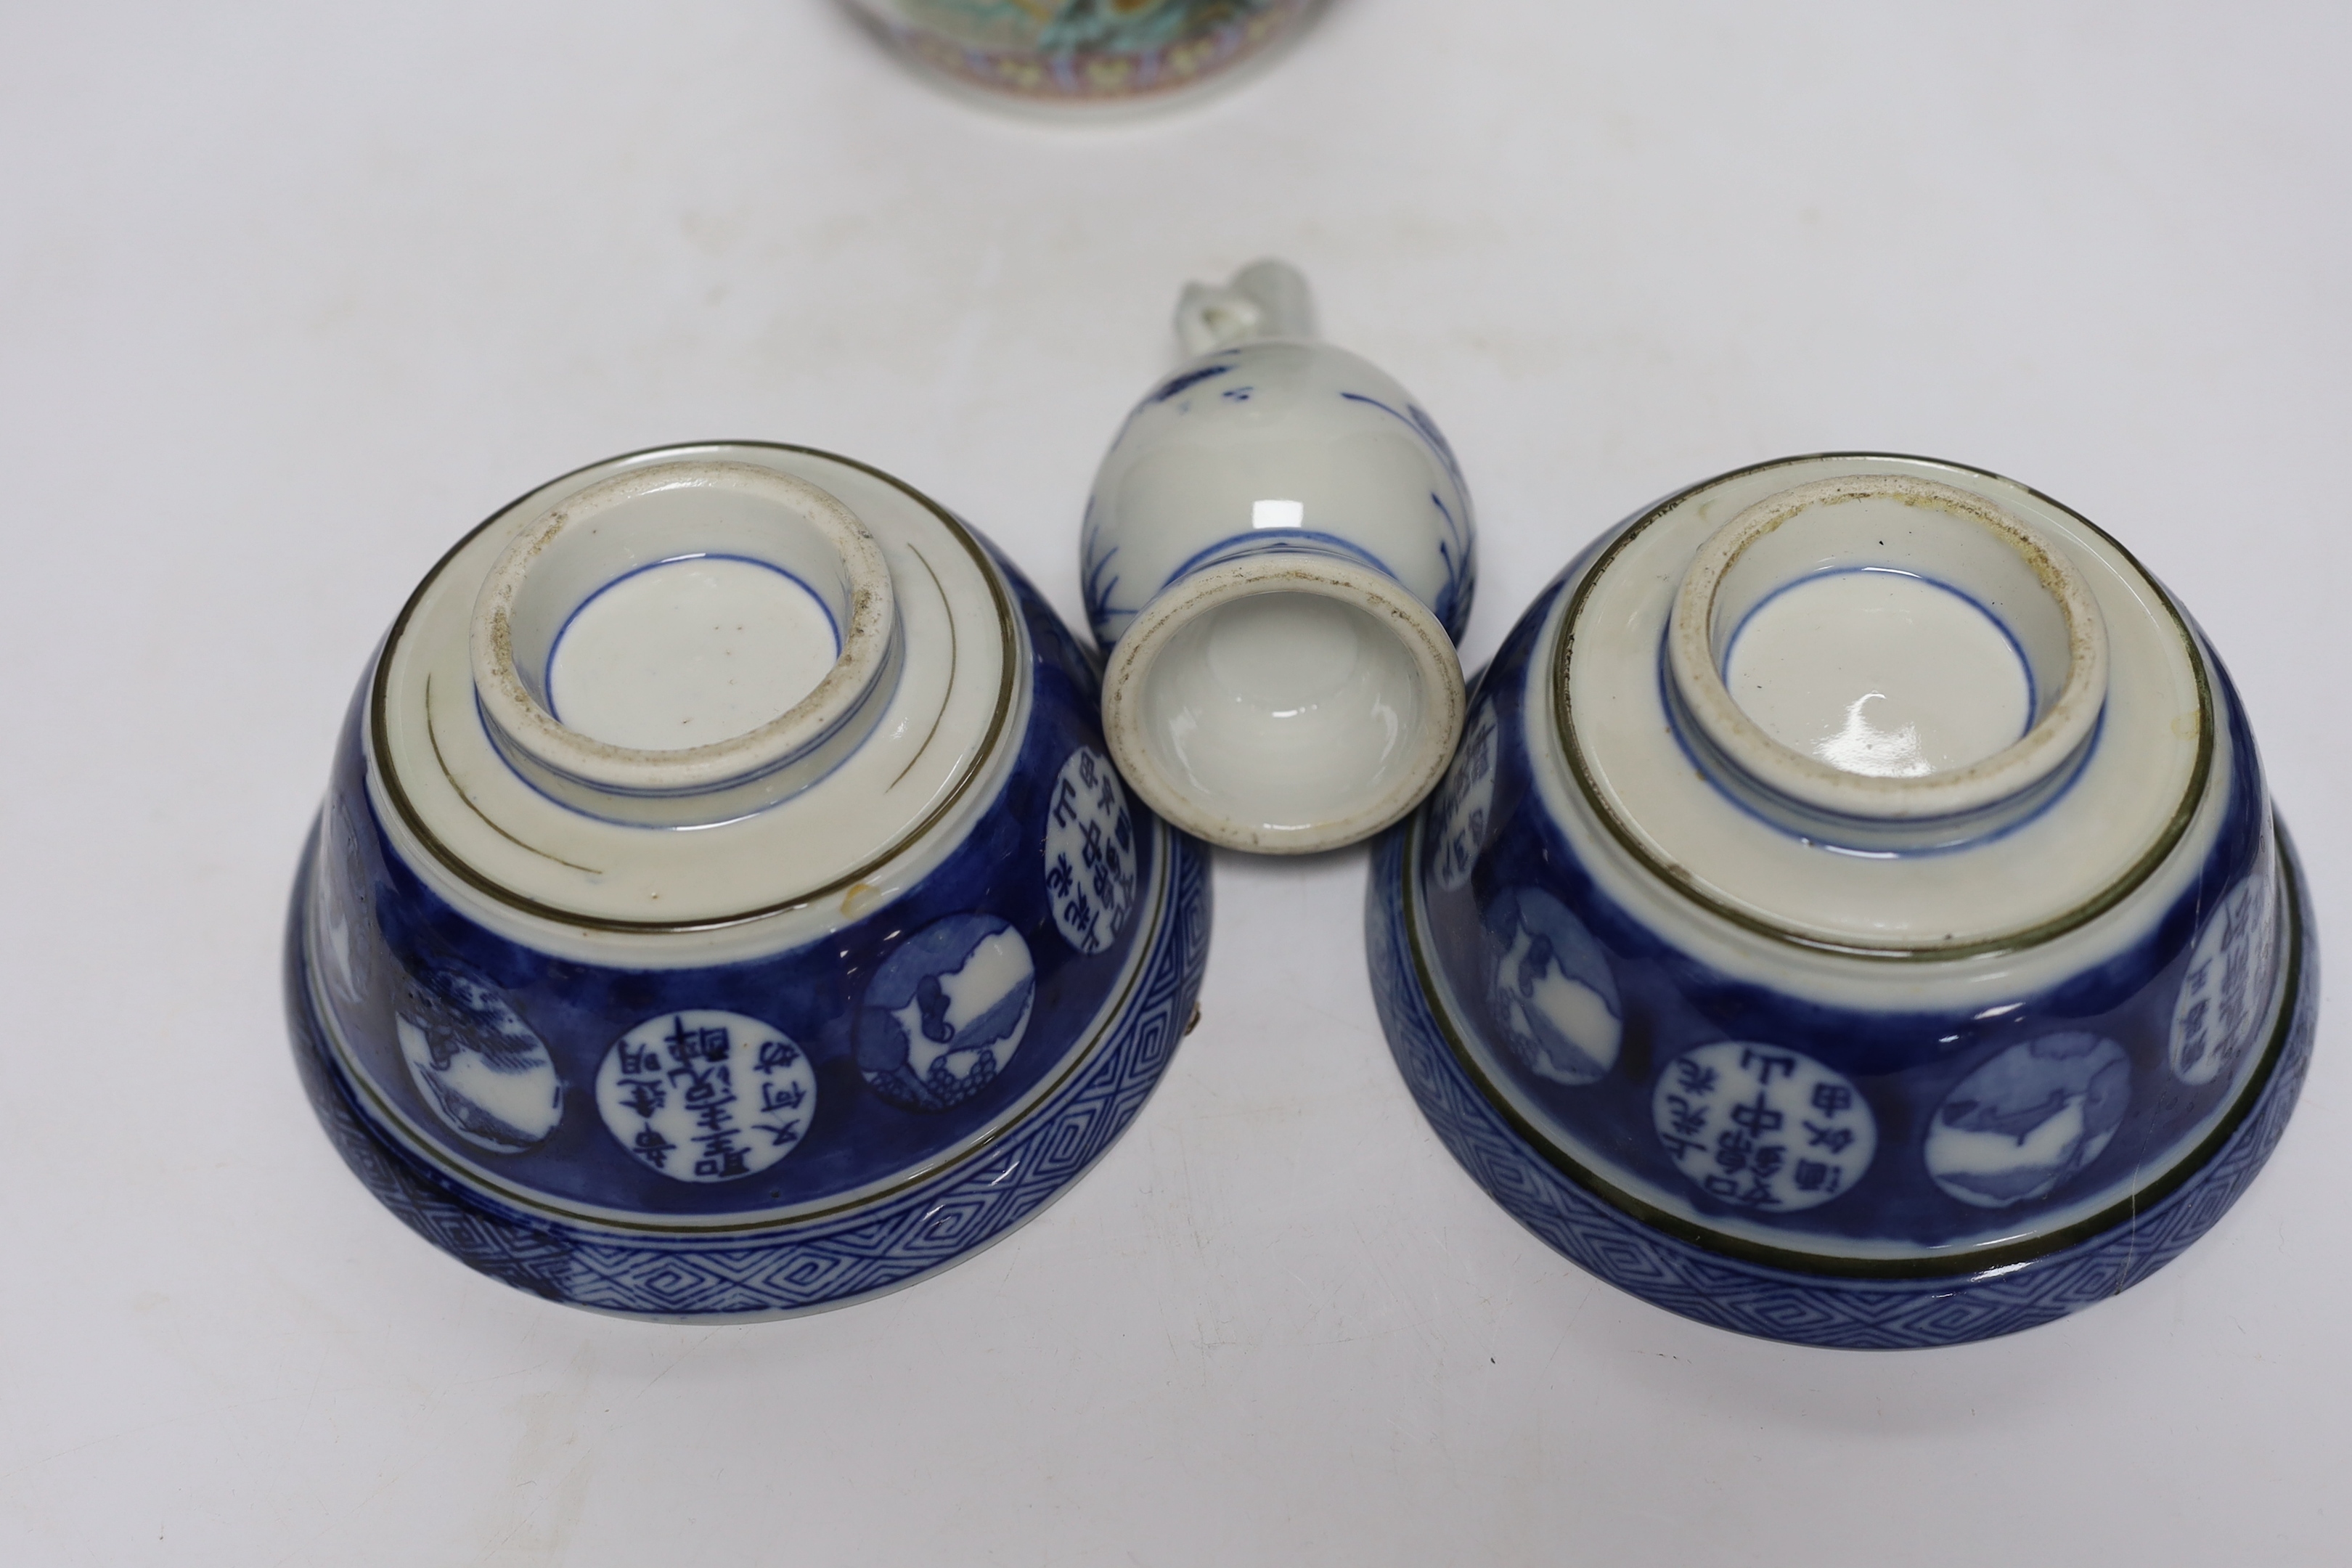 A Chinese famille rose vase, two Japanese blue and white rice bowls and covers and a Japanese blue and white vase (4) tallest 24.5cm